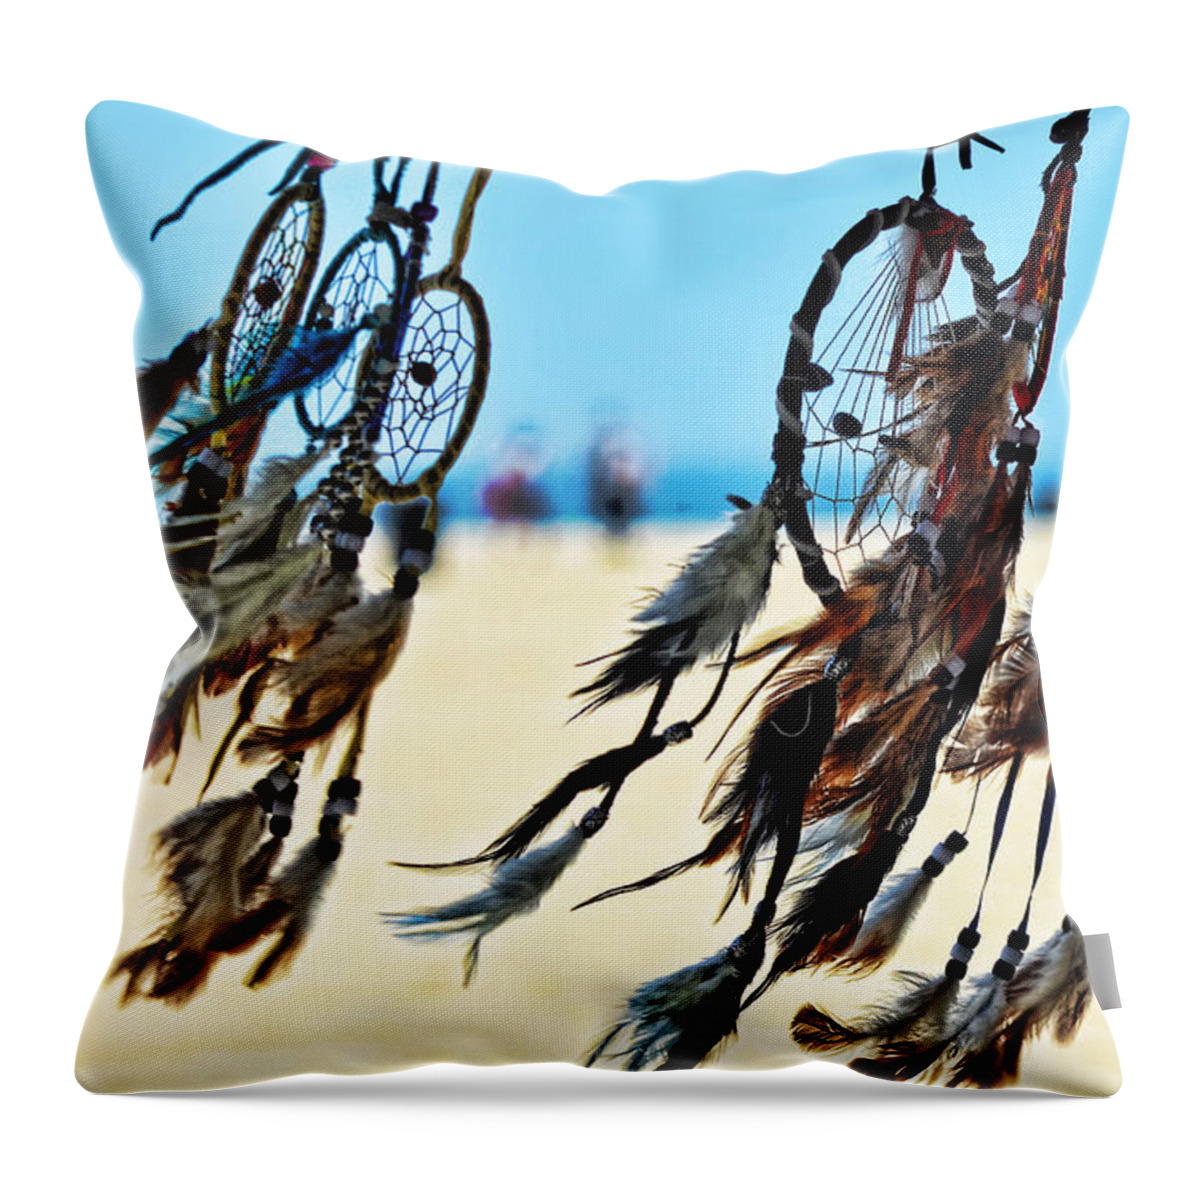 Dream Catcher Throw Pillow featuring the photograph Catch the Dream by Camille Lopez